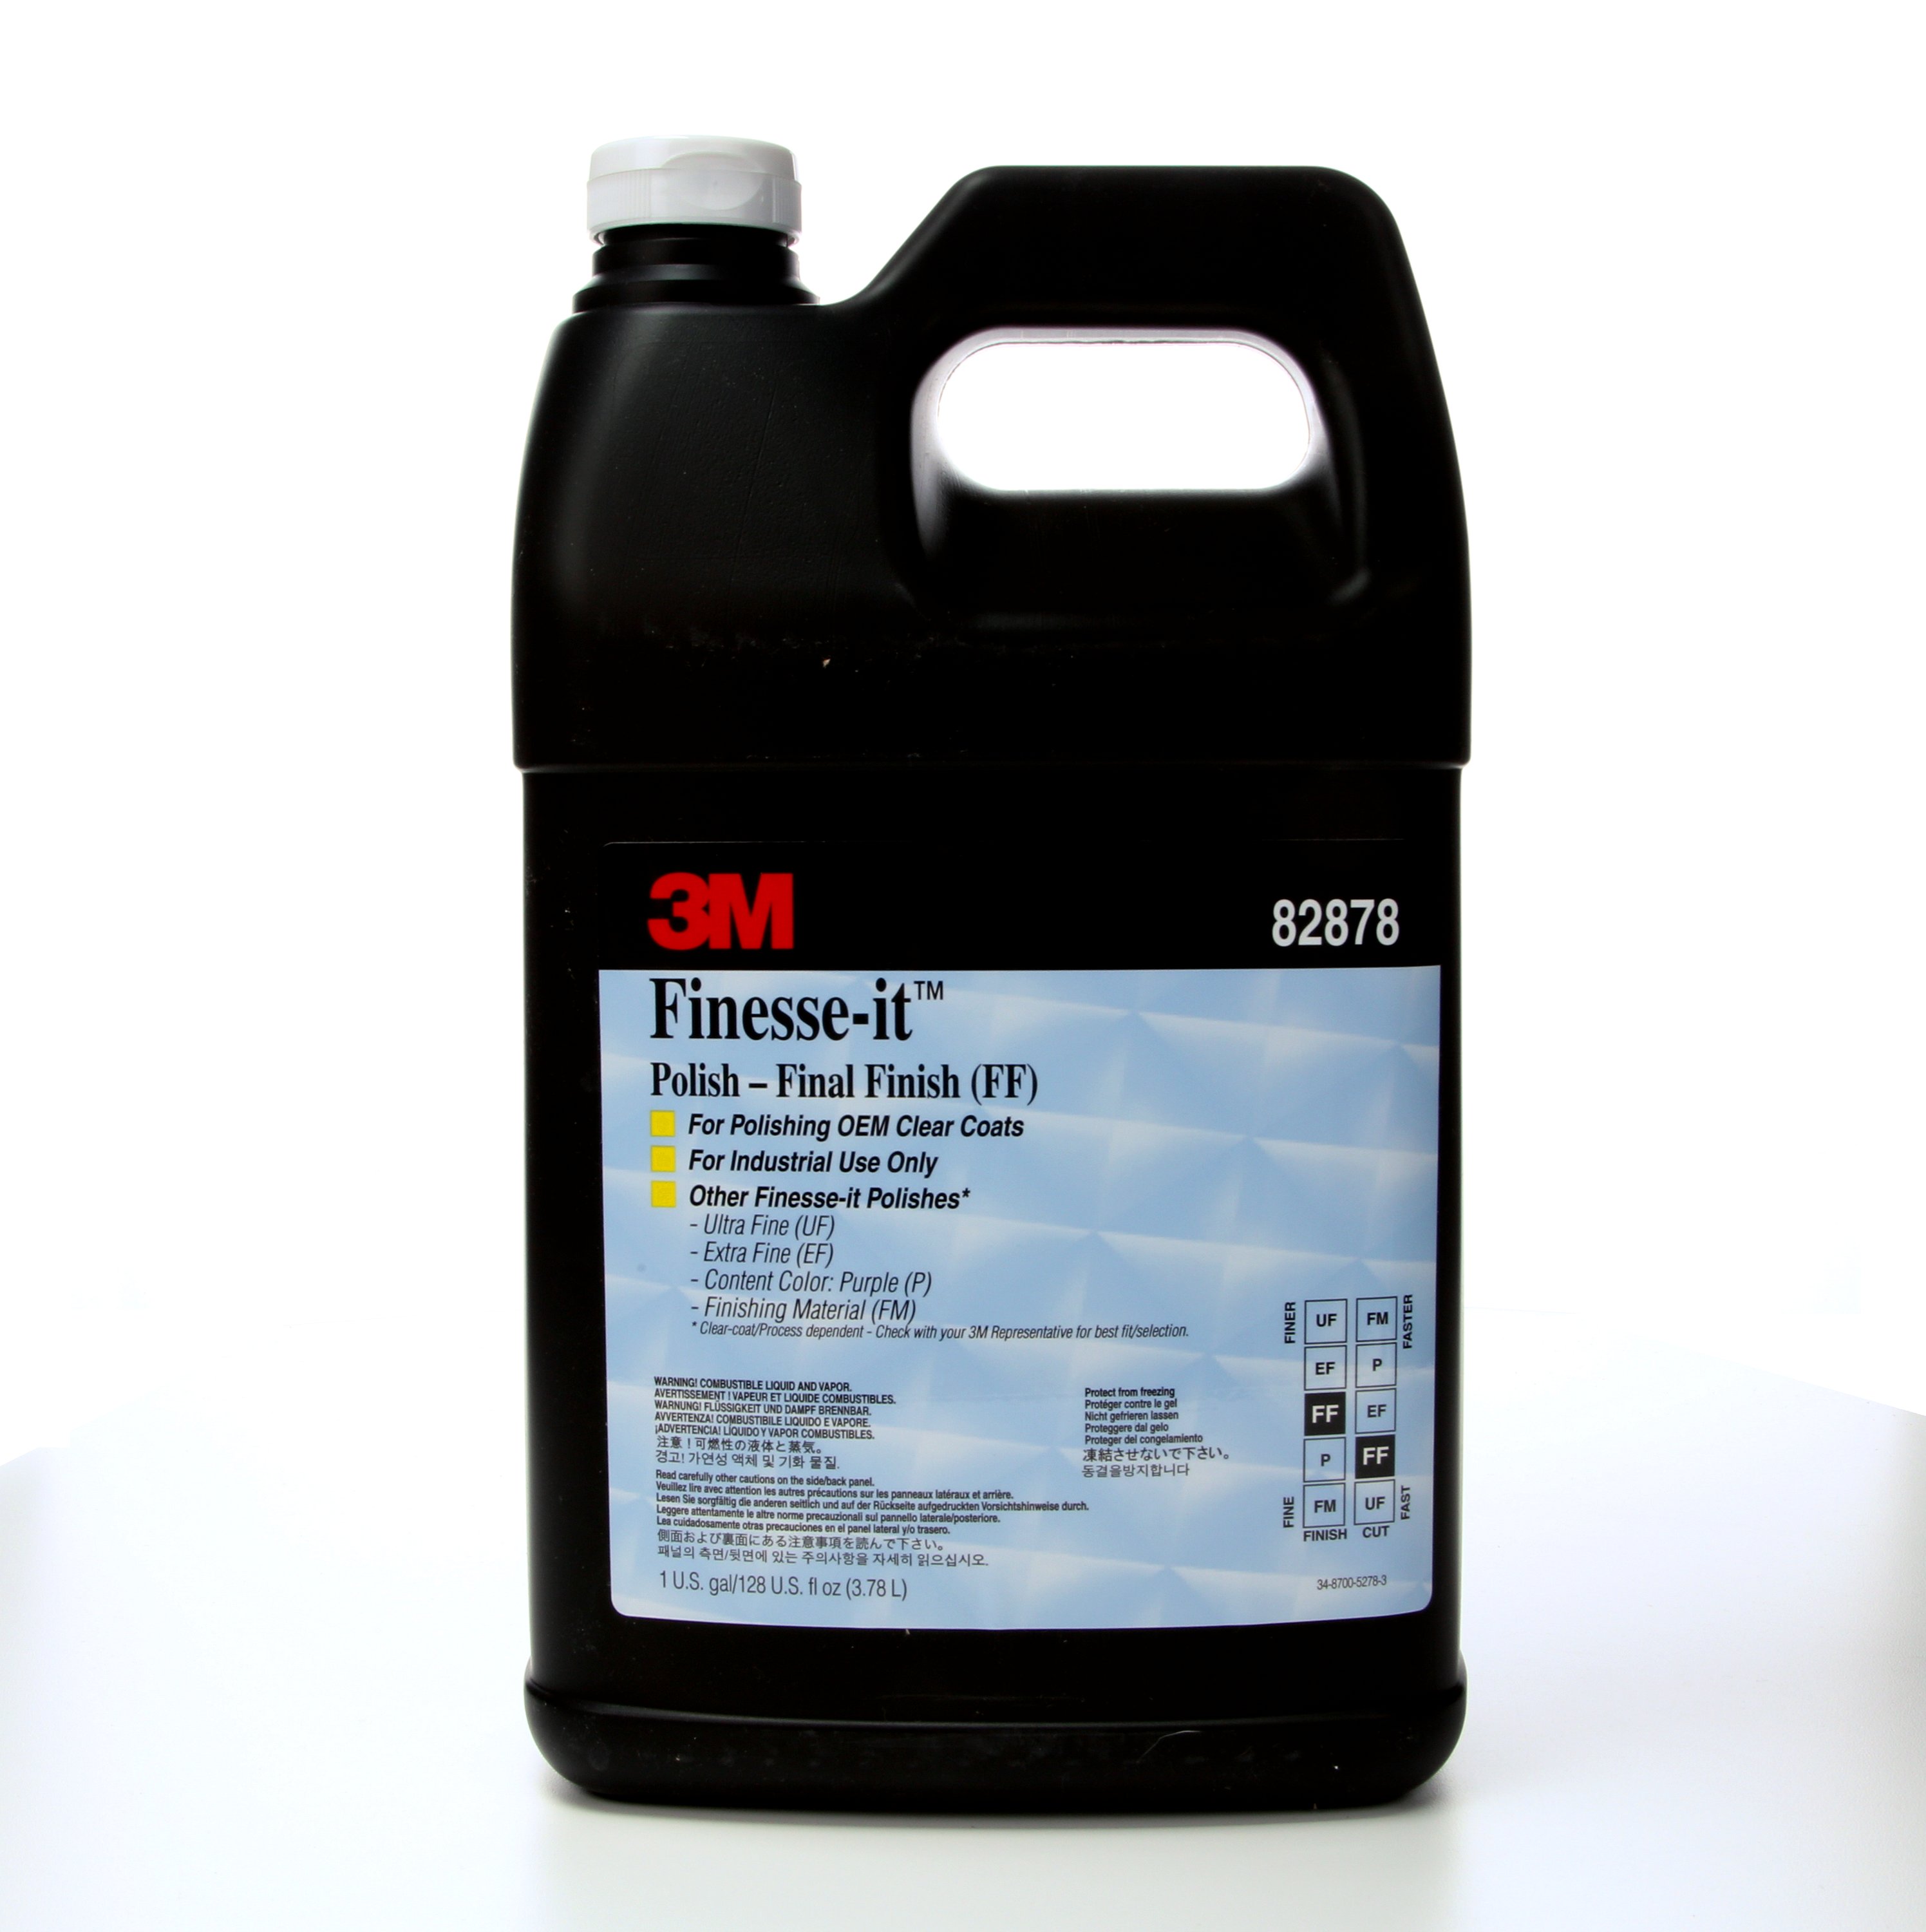 Our 3M™ Finesse-it™ products are a line of specially engineered abrasives, compounds, polishes, and buffing pads to be used on OEM and baked refinish paints to remove defects, sand scratches, or swirl marks on a variety of painted surfaces.